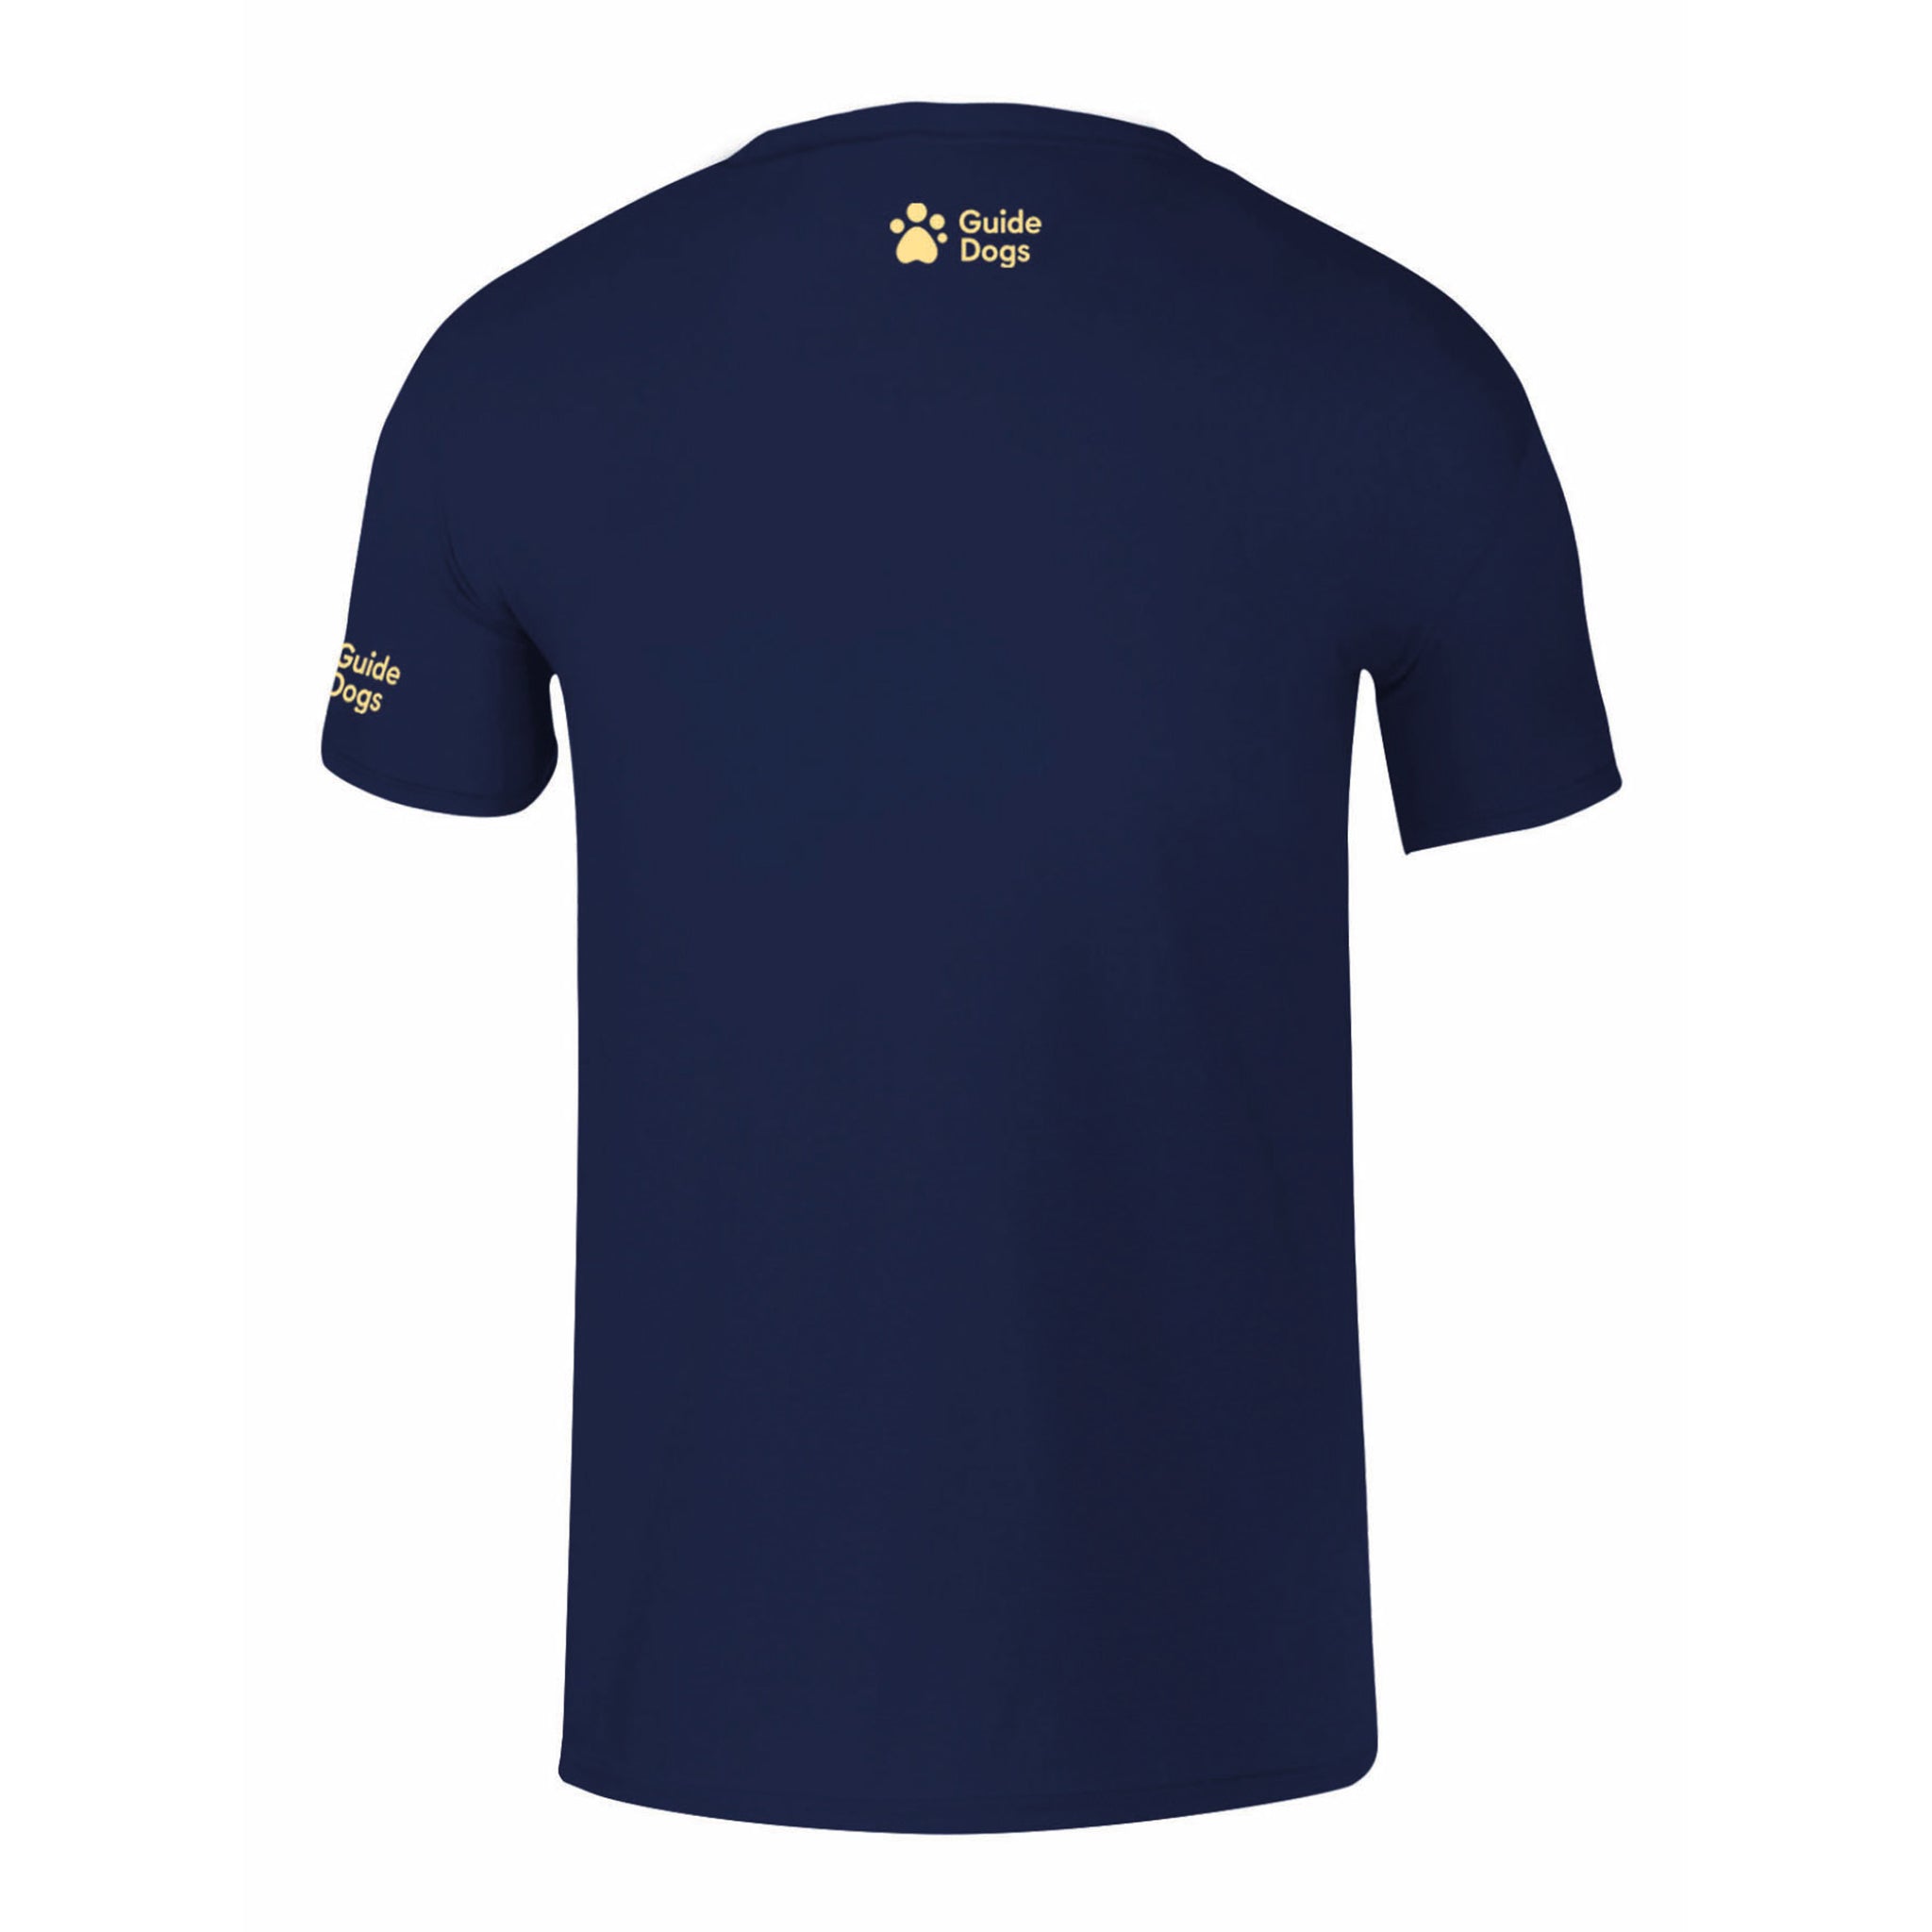 A close up of the back of a navy blue women's t-shirt, the Guide Dogs logo is printed on the left sleeve and back of the collar.